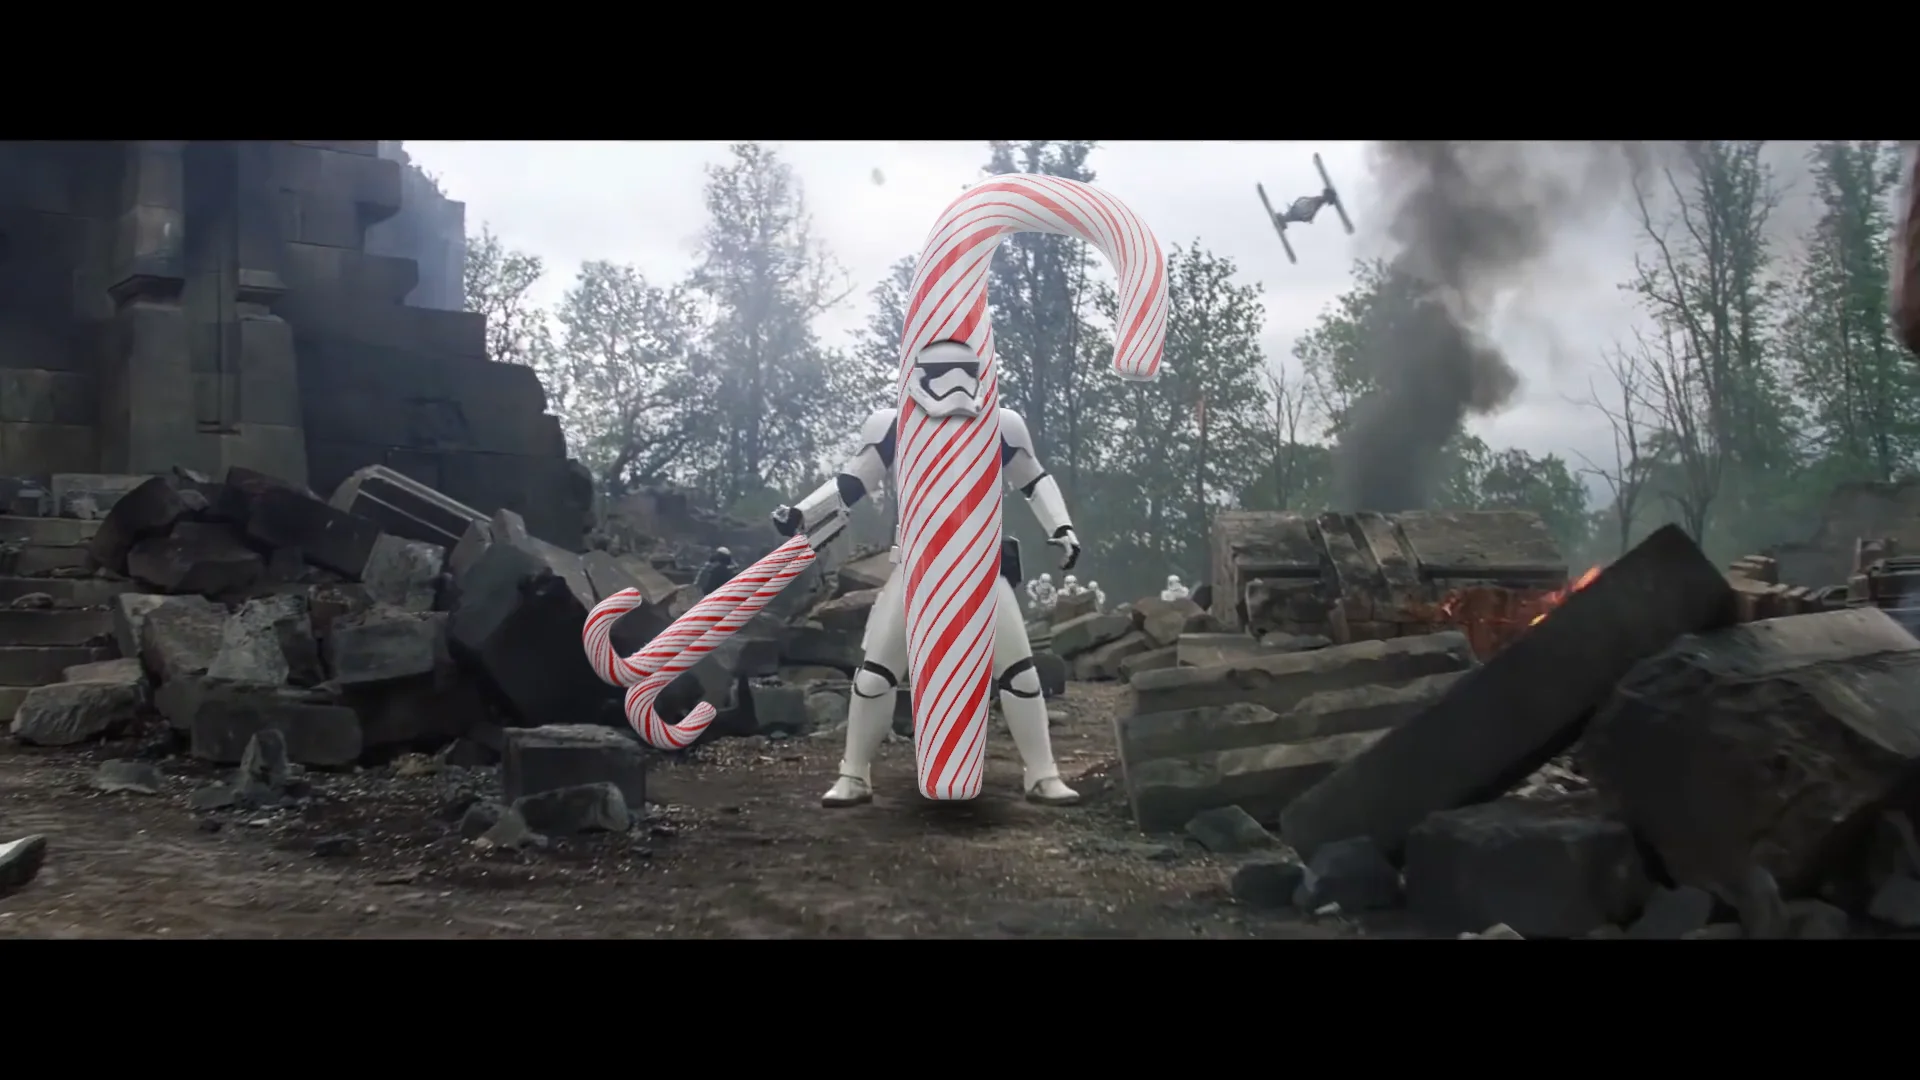 CANDY UP - STAR WARS on Vimeo